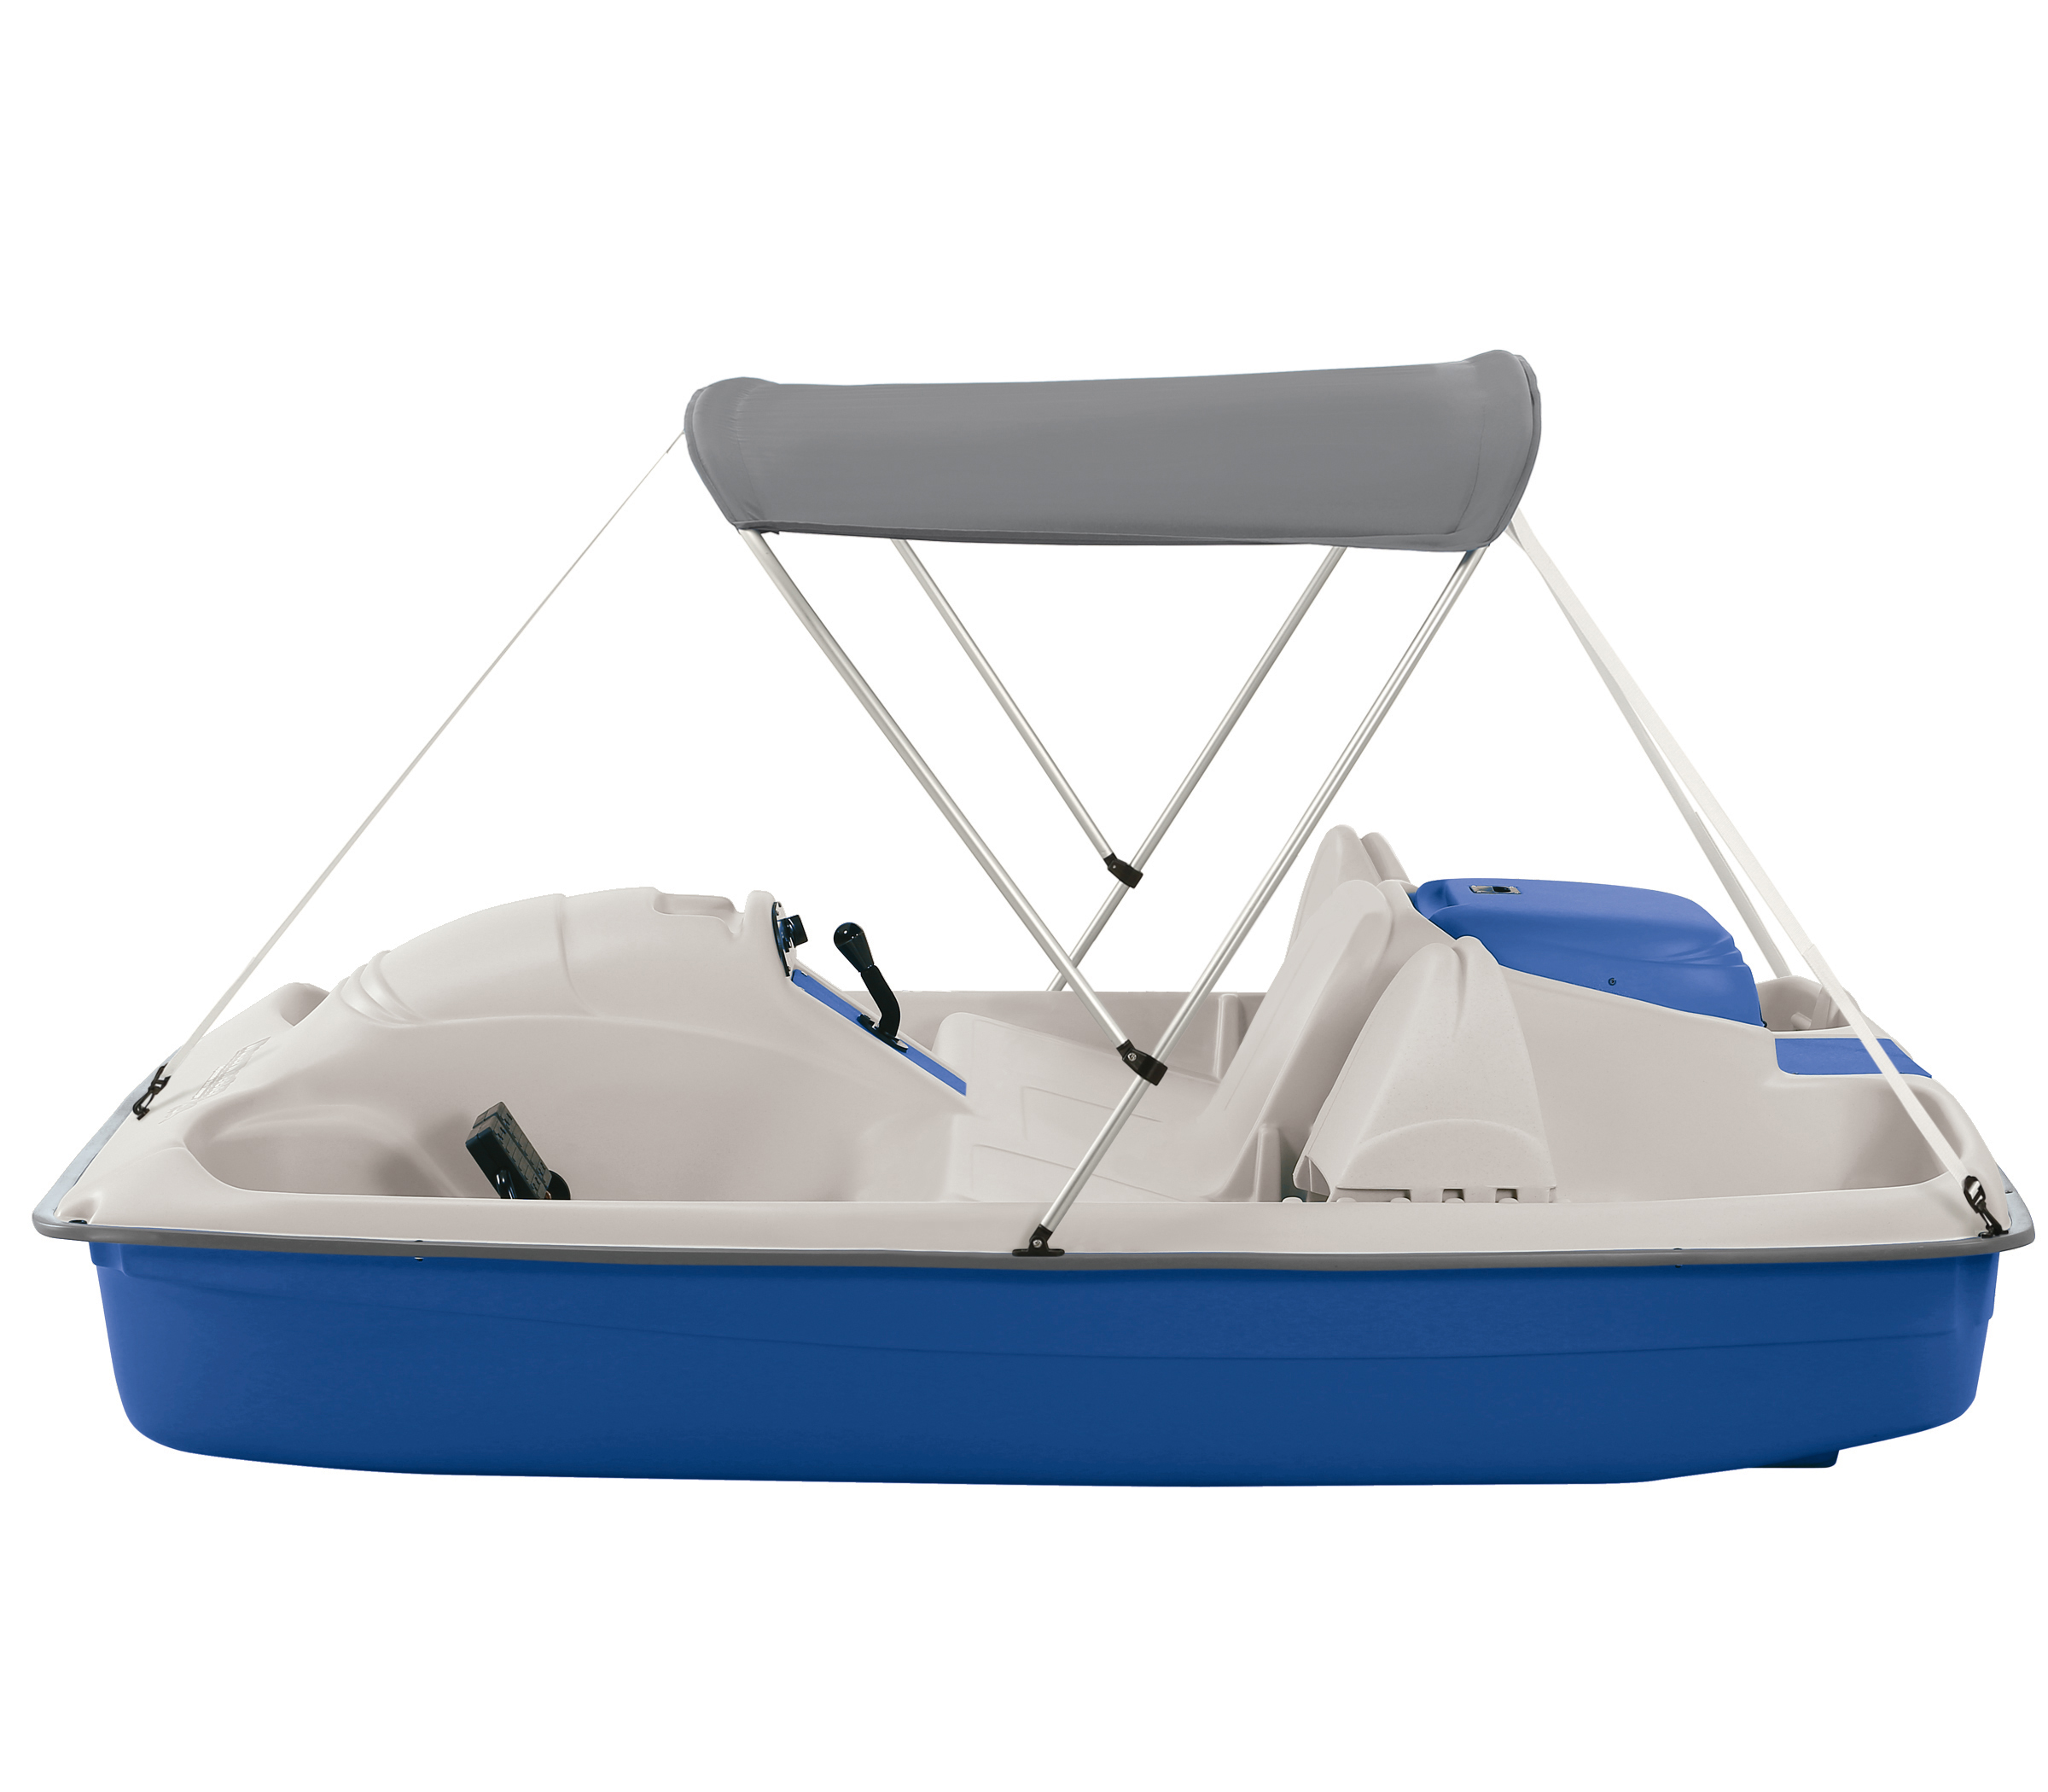 Water Wheeler ASL Electric Pedal Boat with Canopy, Blue - image 2 of 6